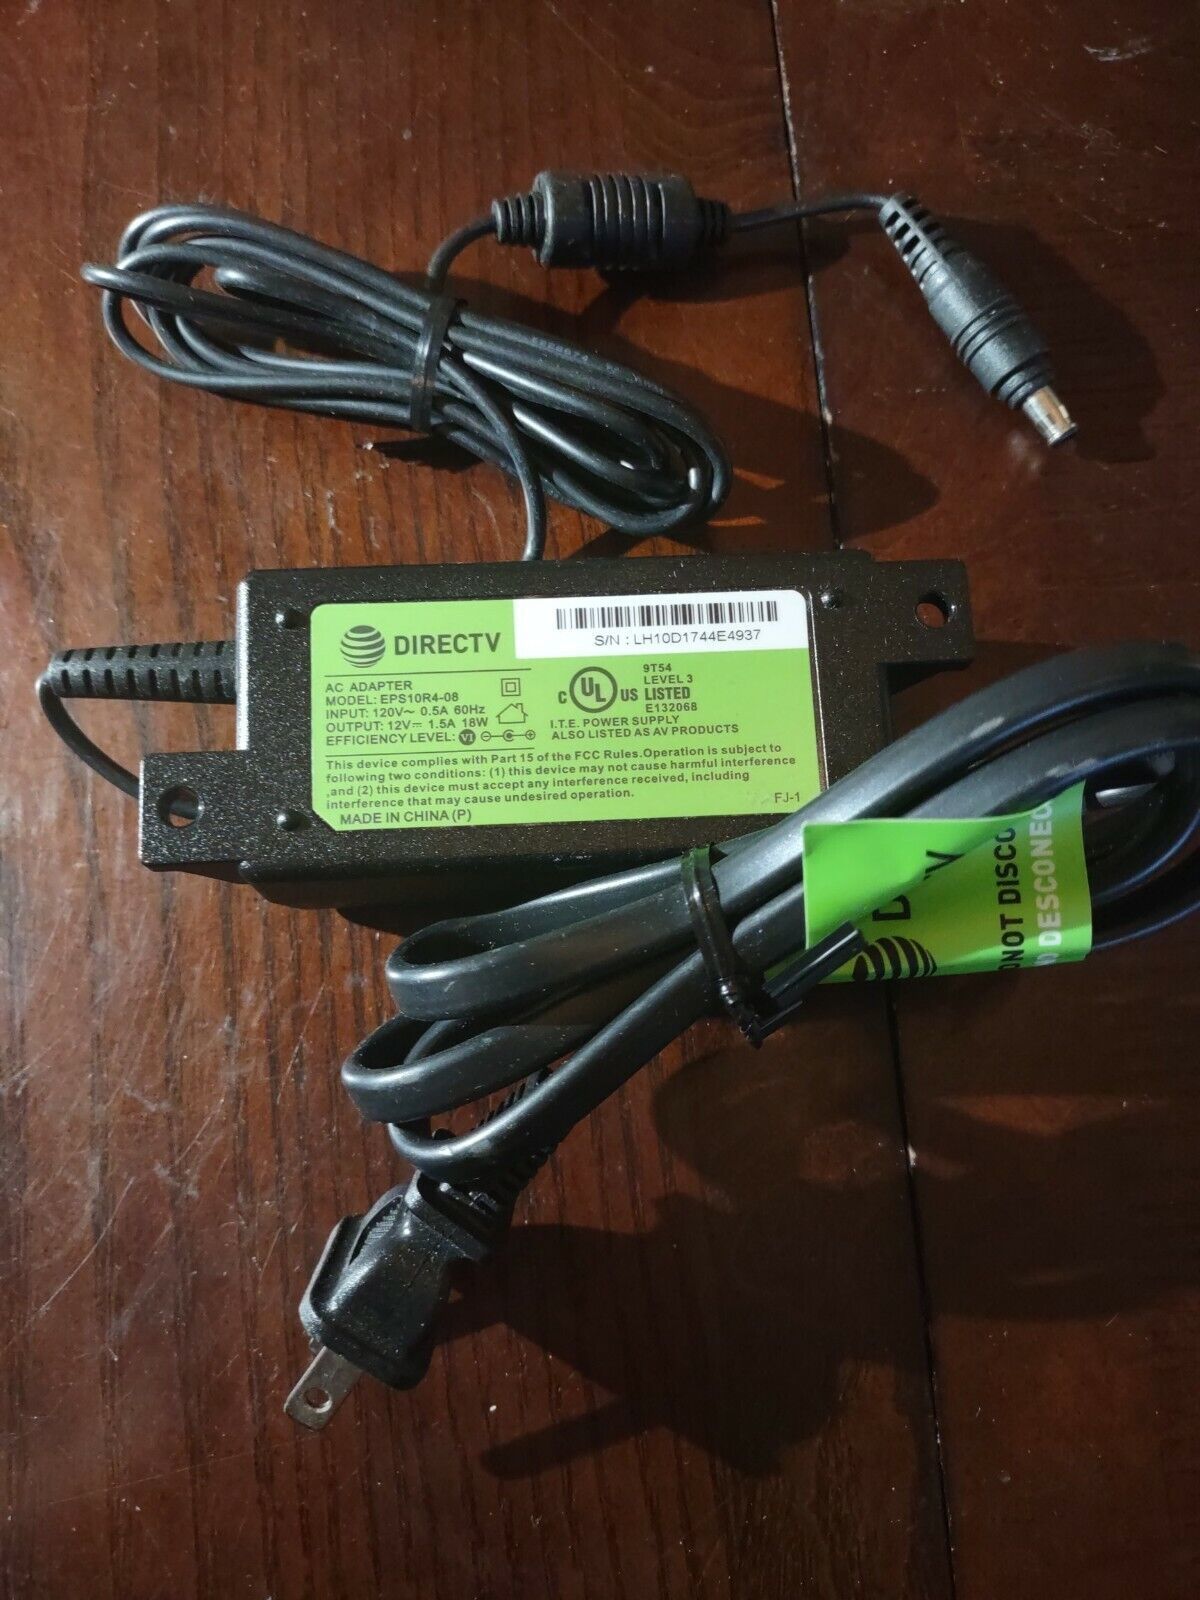 Primary image for DirecTV AC Adapter Model: EPS10R4-08  S/N: LH10D1744E4937